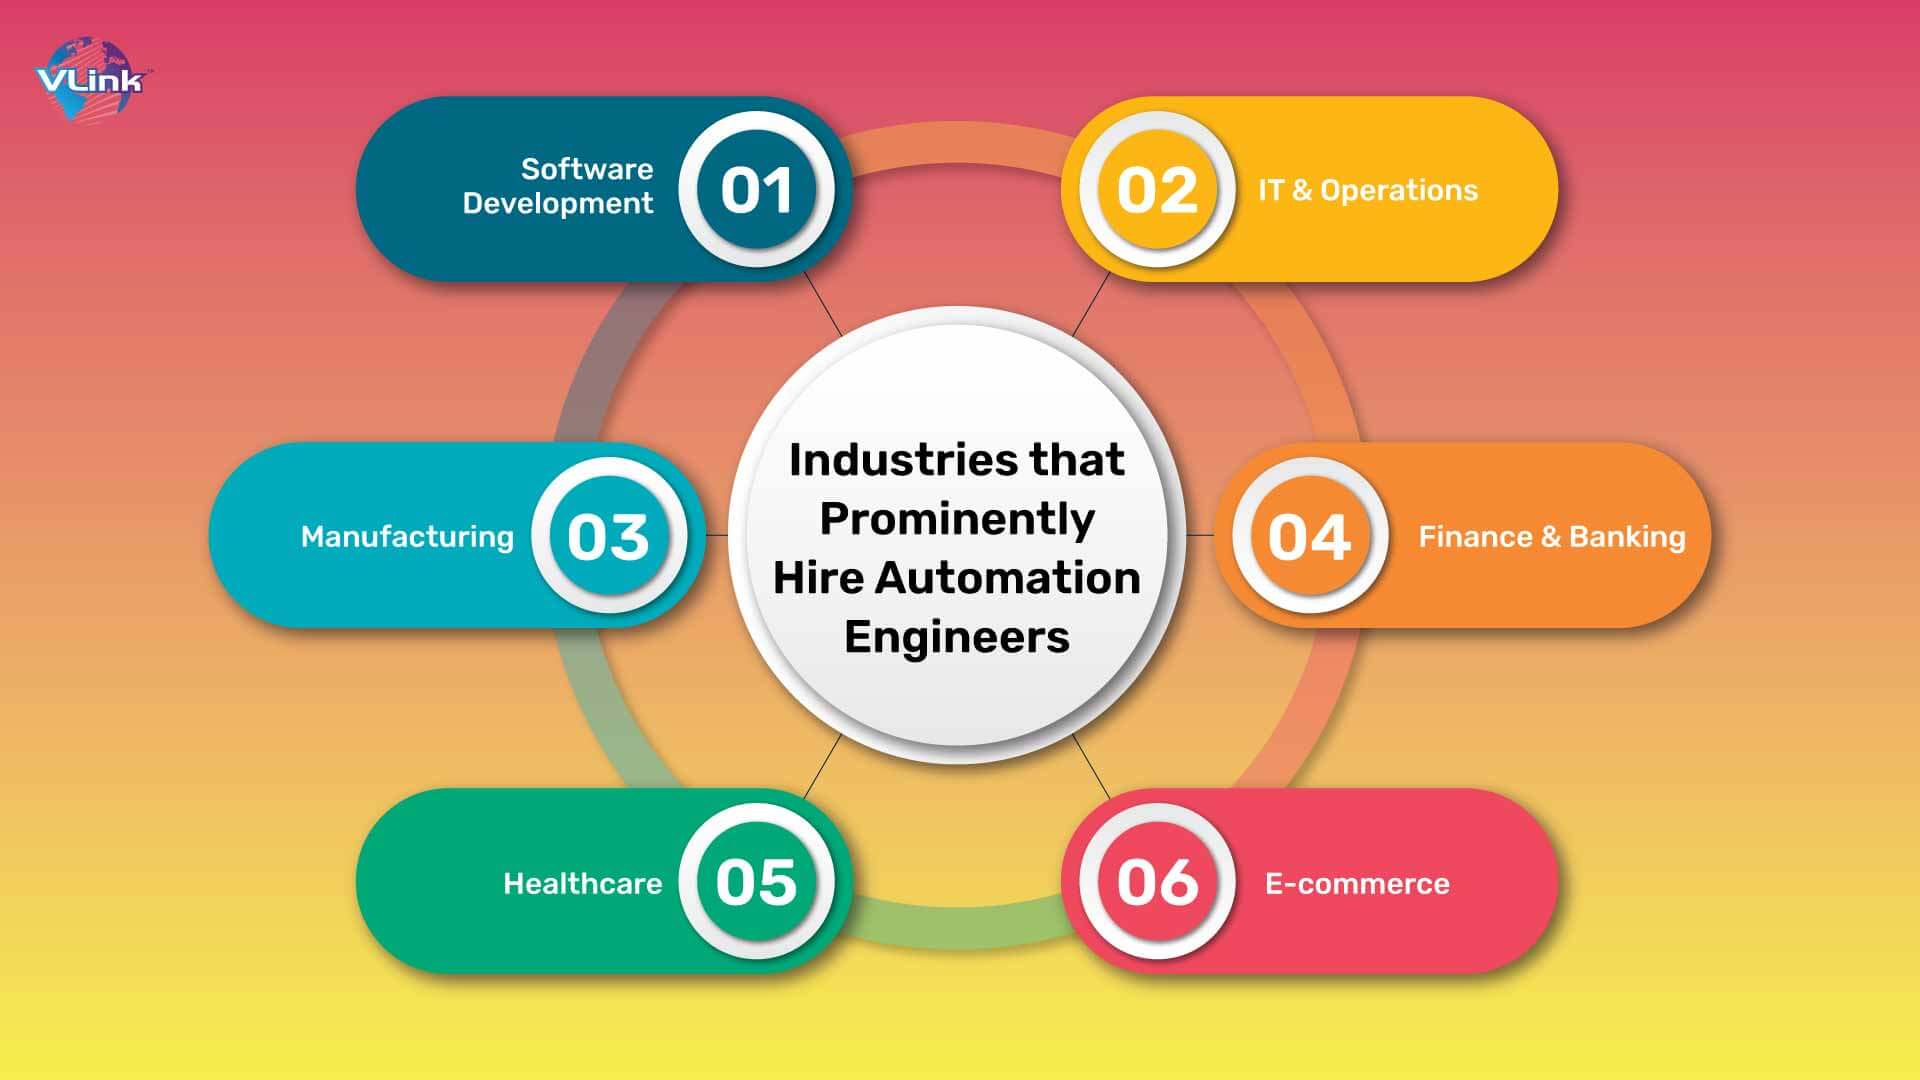 Industries that Prominently Hire Automation Engineers